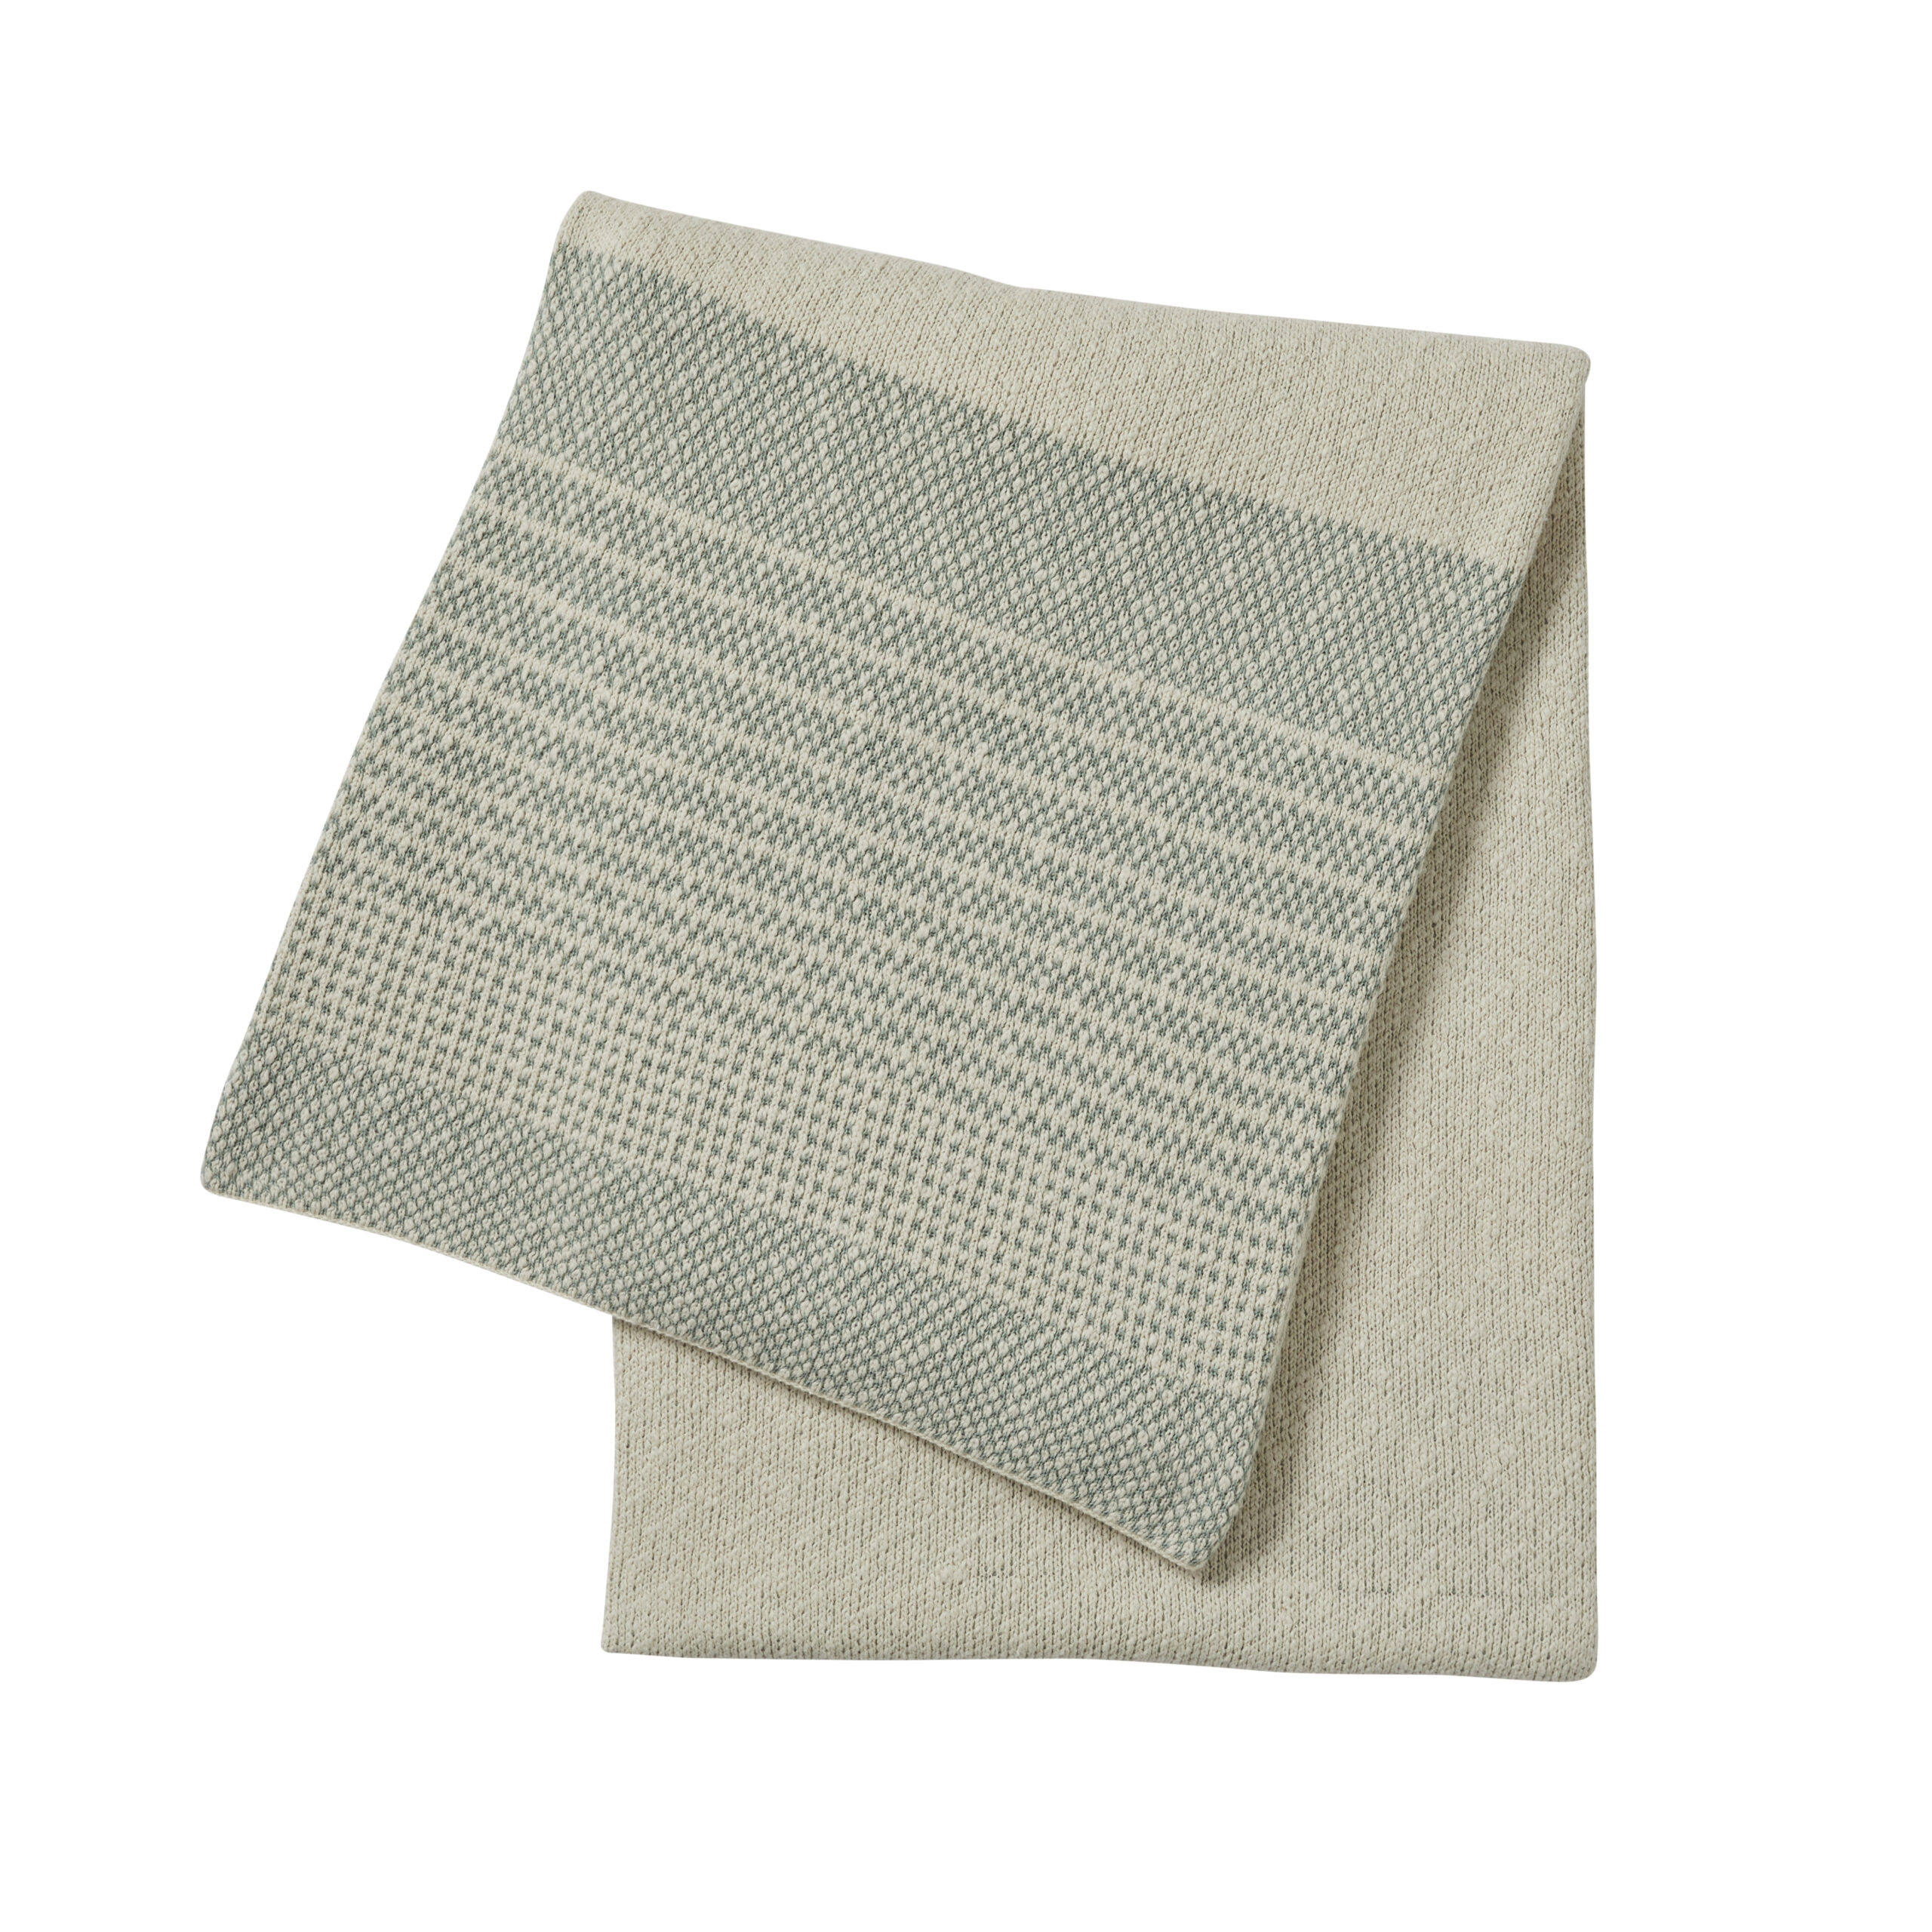 Sonoma Throw - Laurel - By Weave Home - Textured Design Group